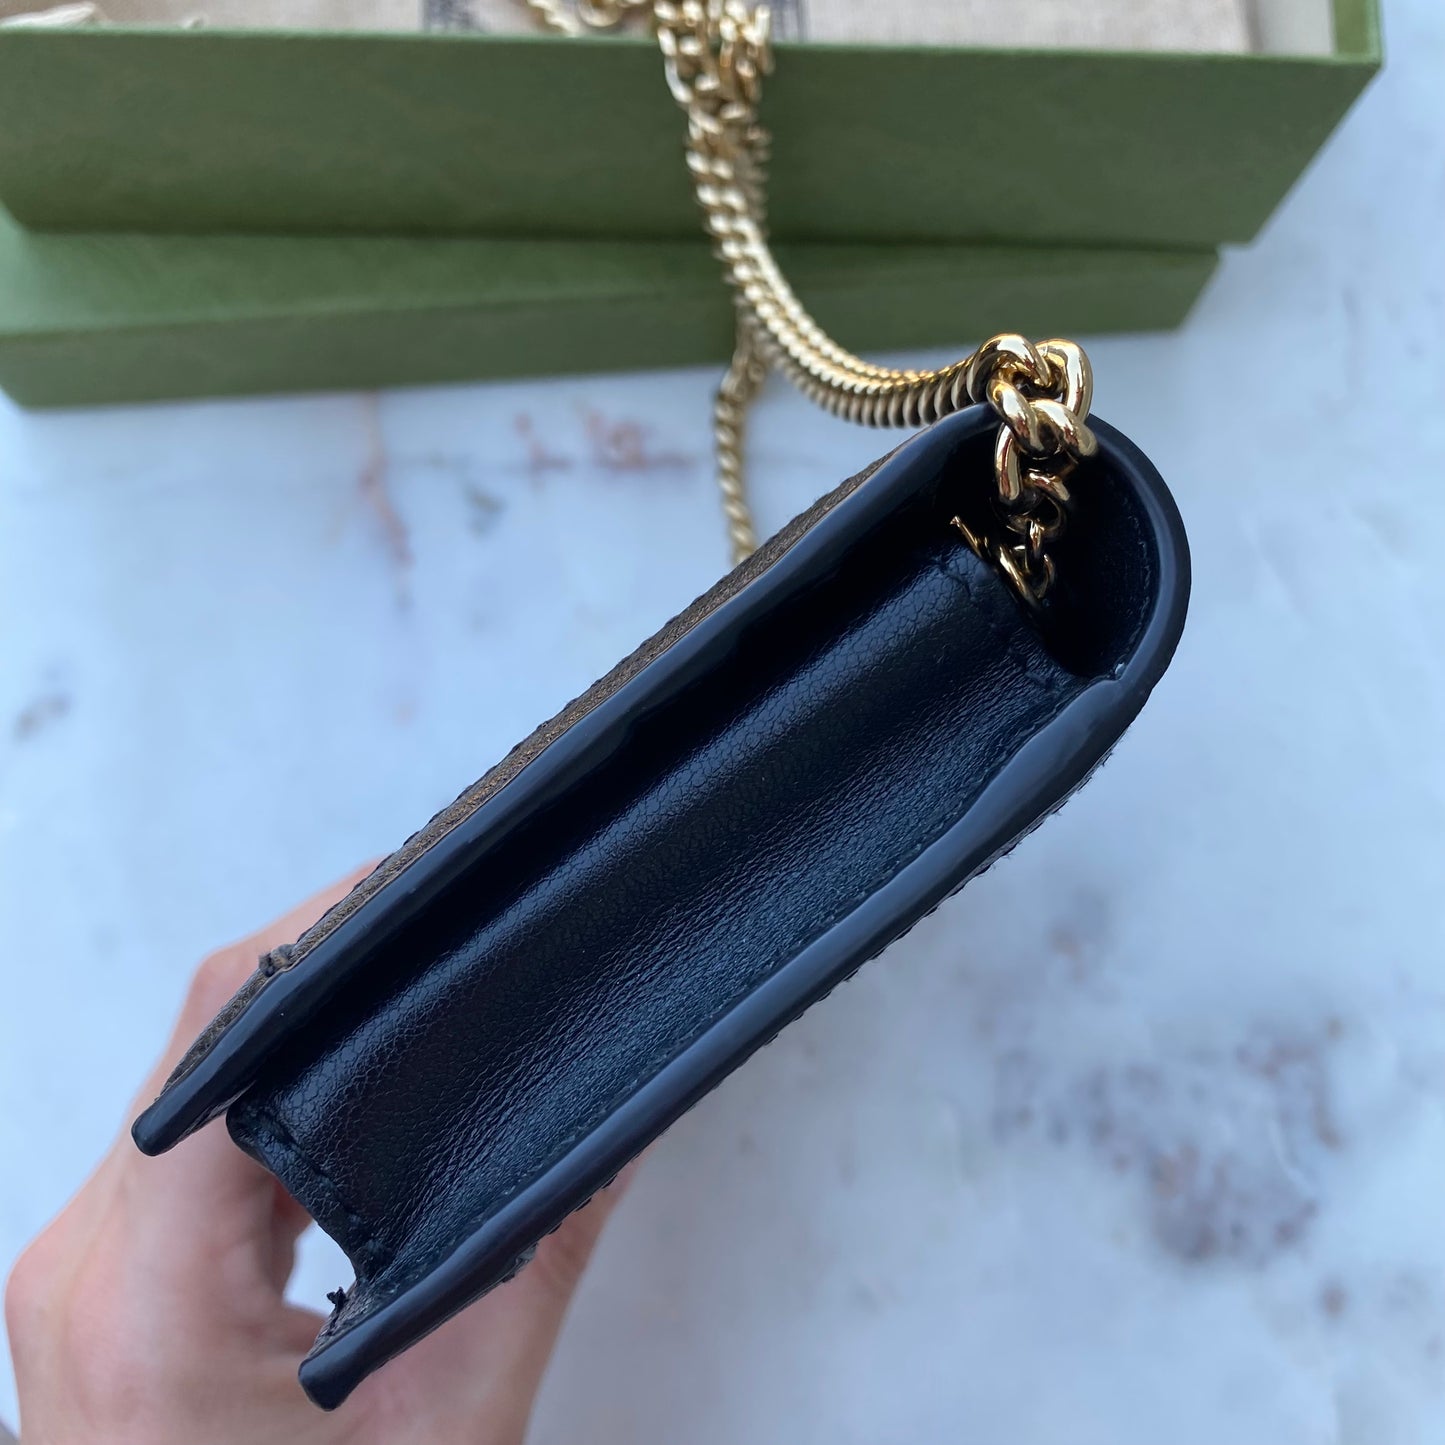 Gucci Full Flap Wallet on Chain GG Embossed Leather Crossbody